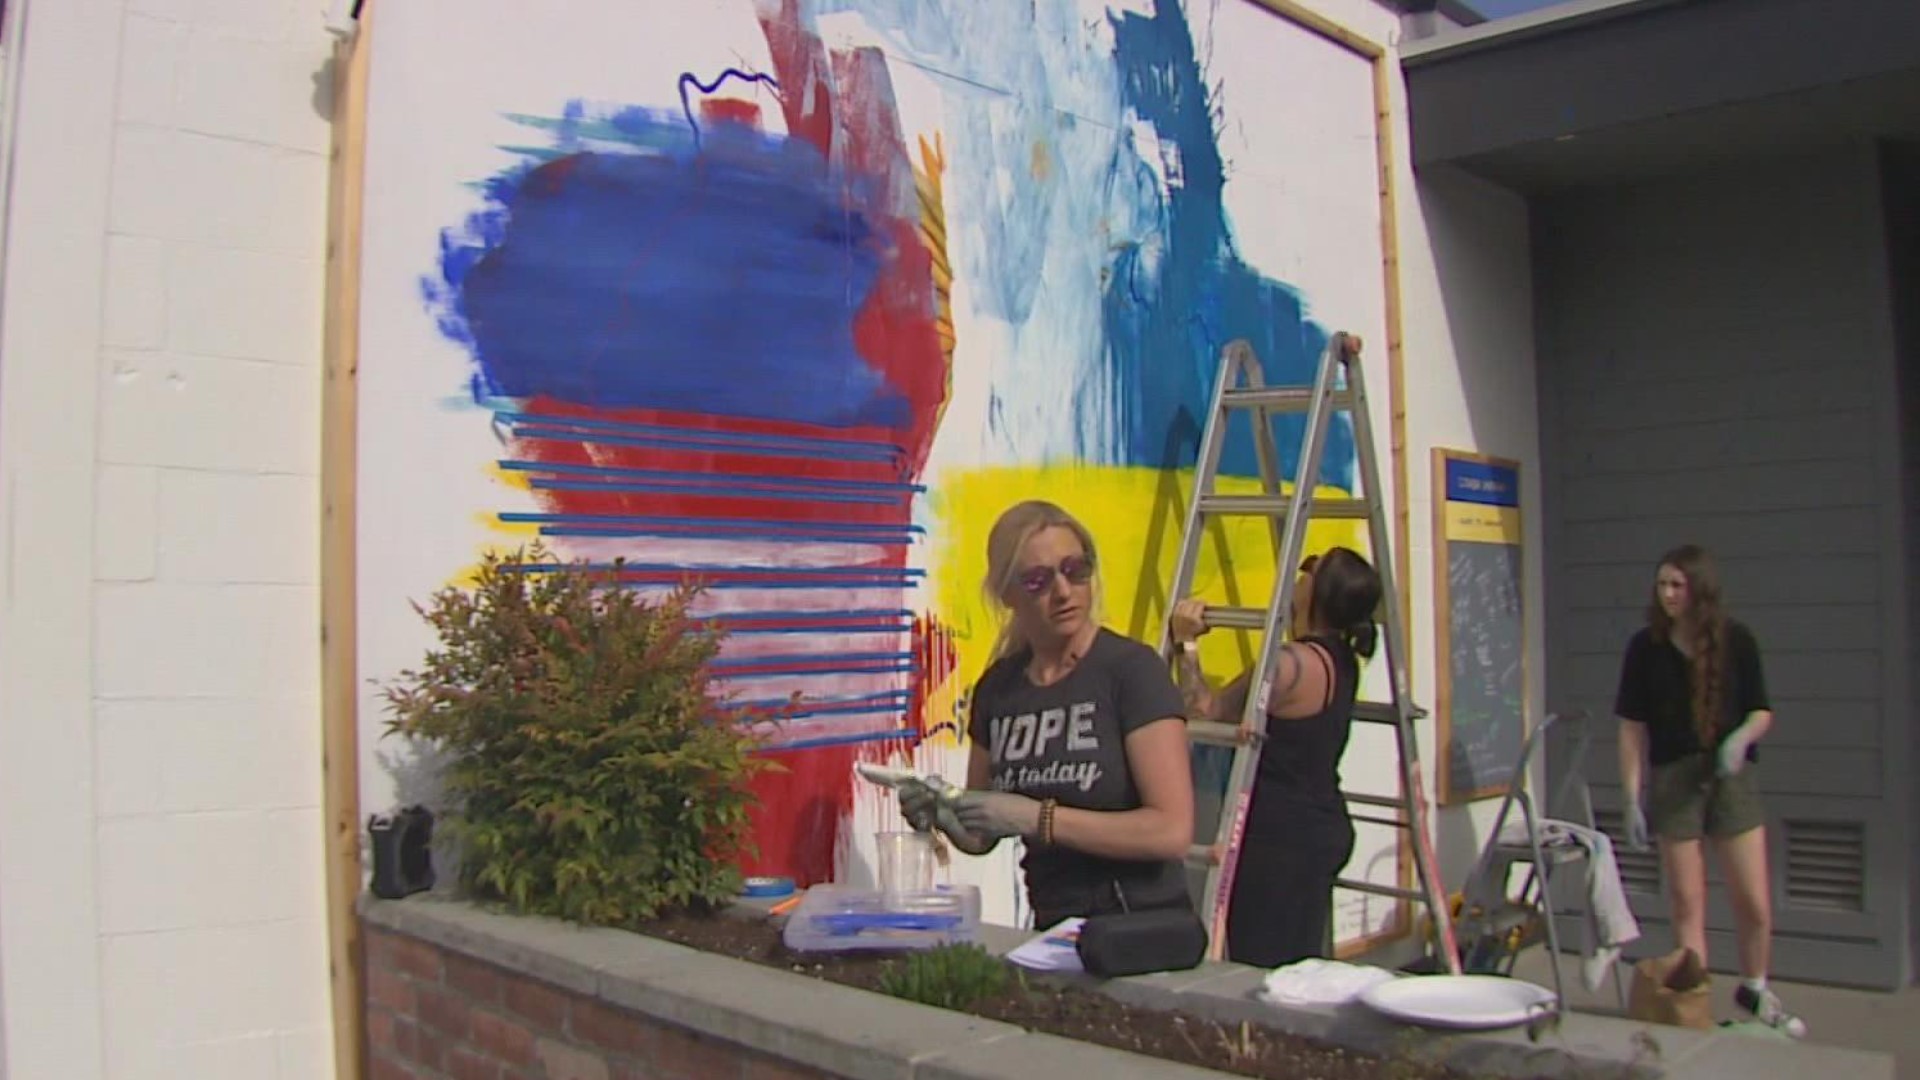 A Gig Harbor mural showing support for Ukraine amid the Russian invasion was vandalized overnight Wednesday.